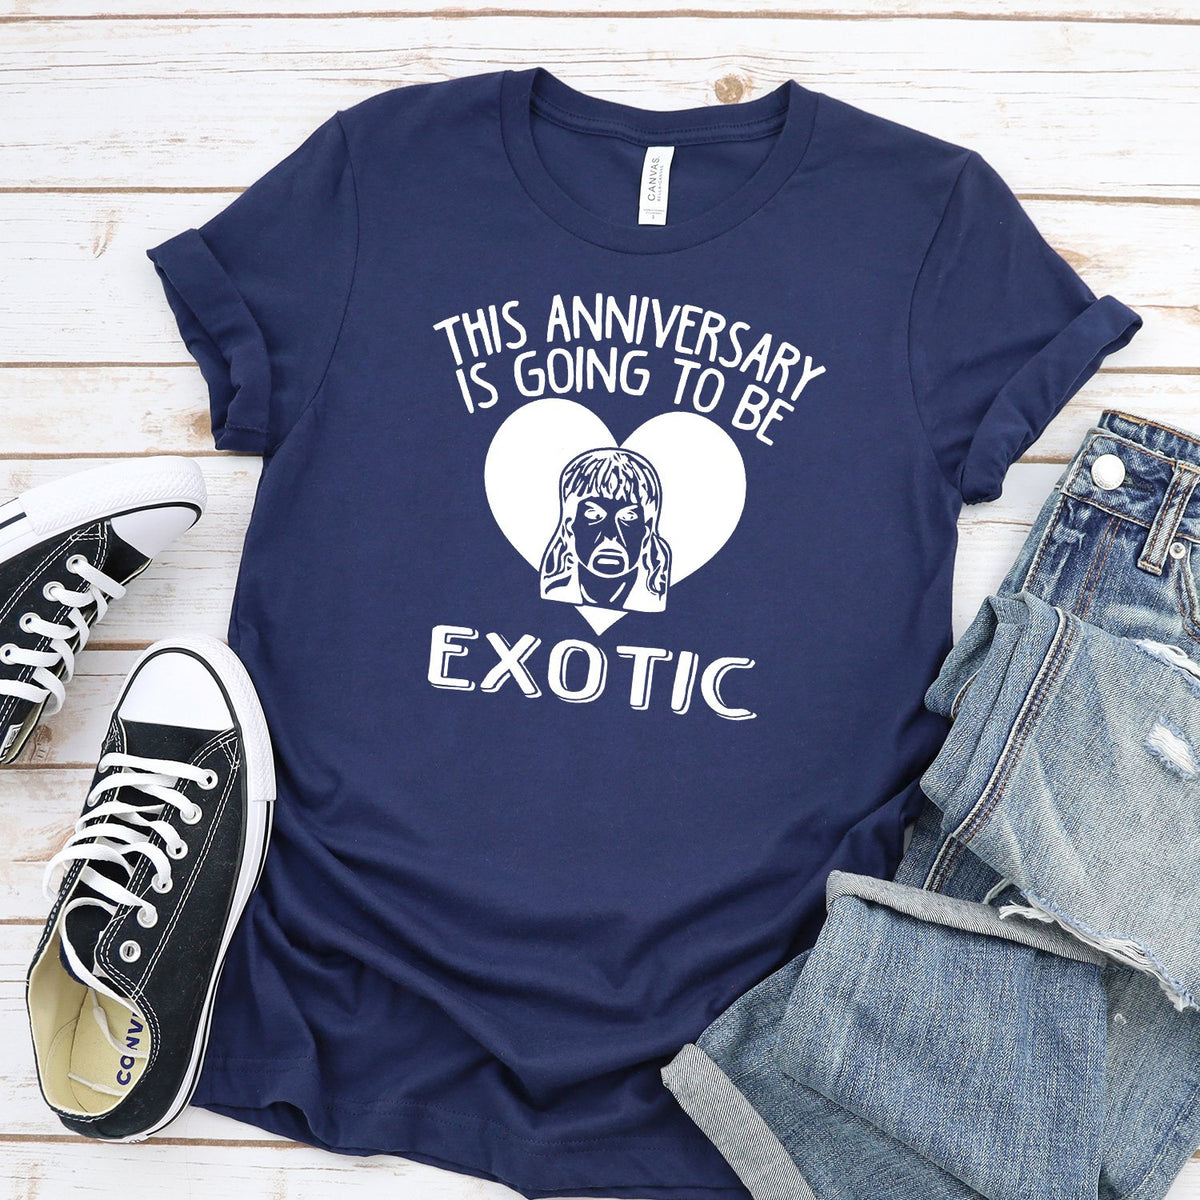 This Anniversary is Going To Be Exotic - Short Sleeve Tee Shirt